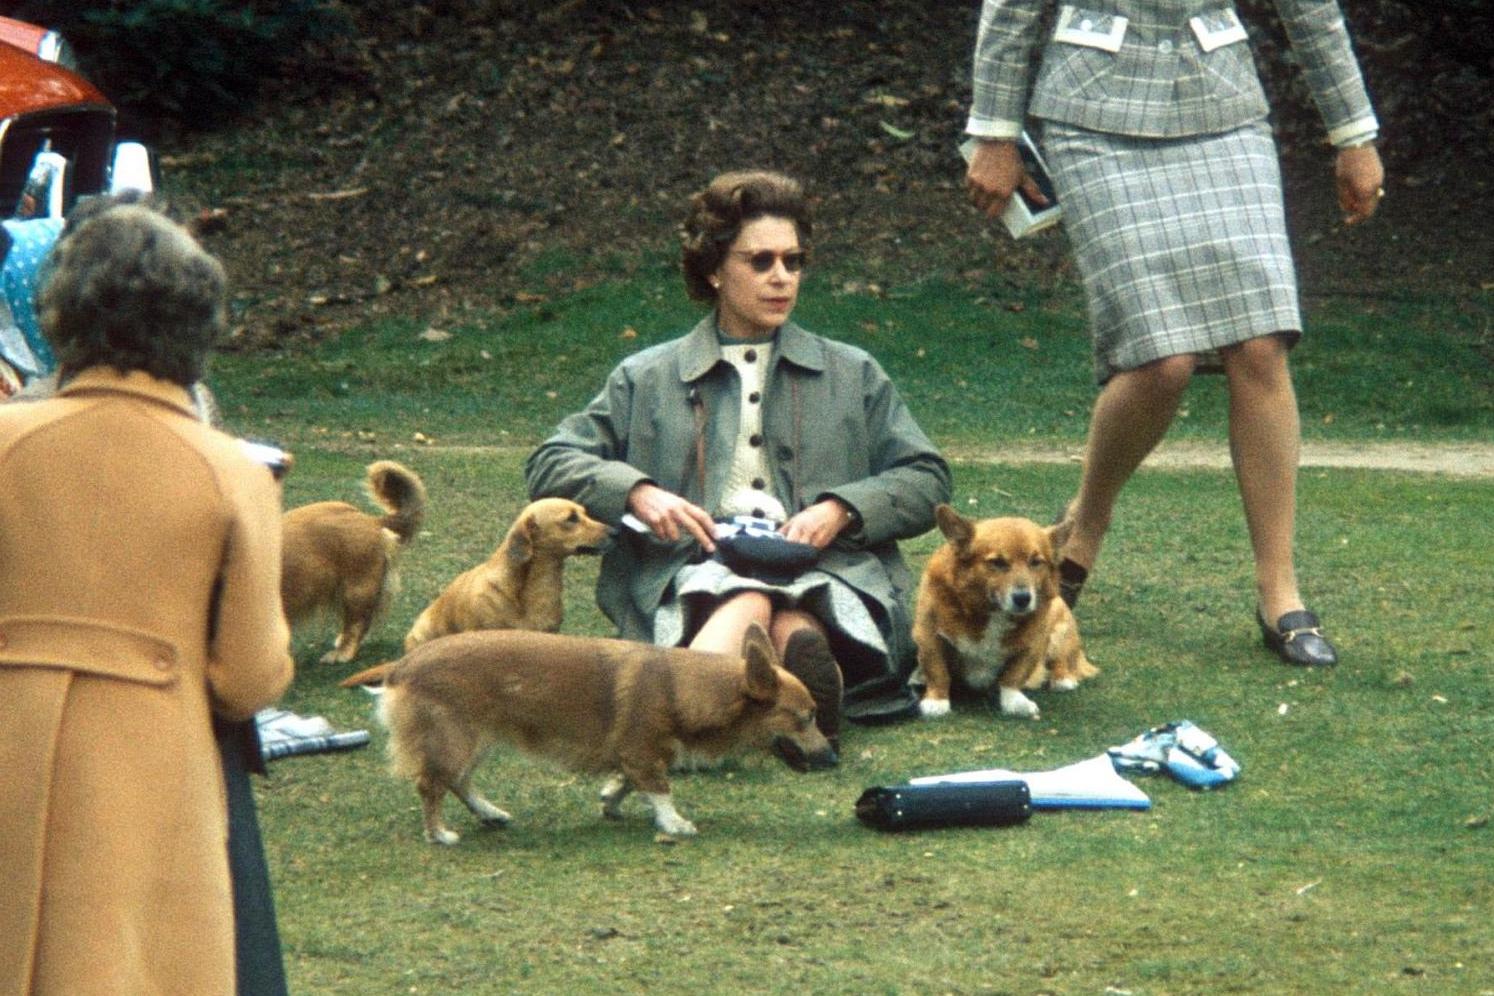 the queen and her corgis